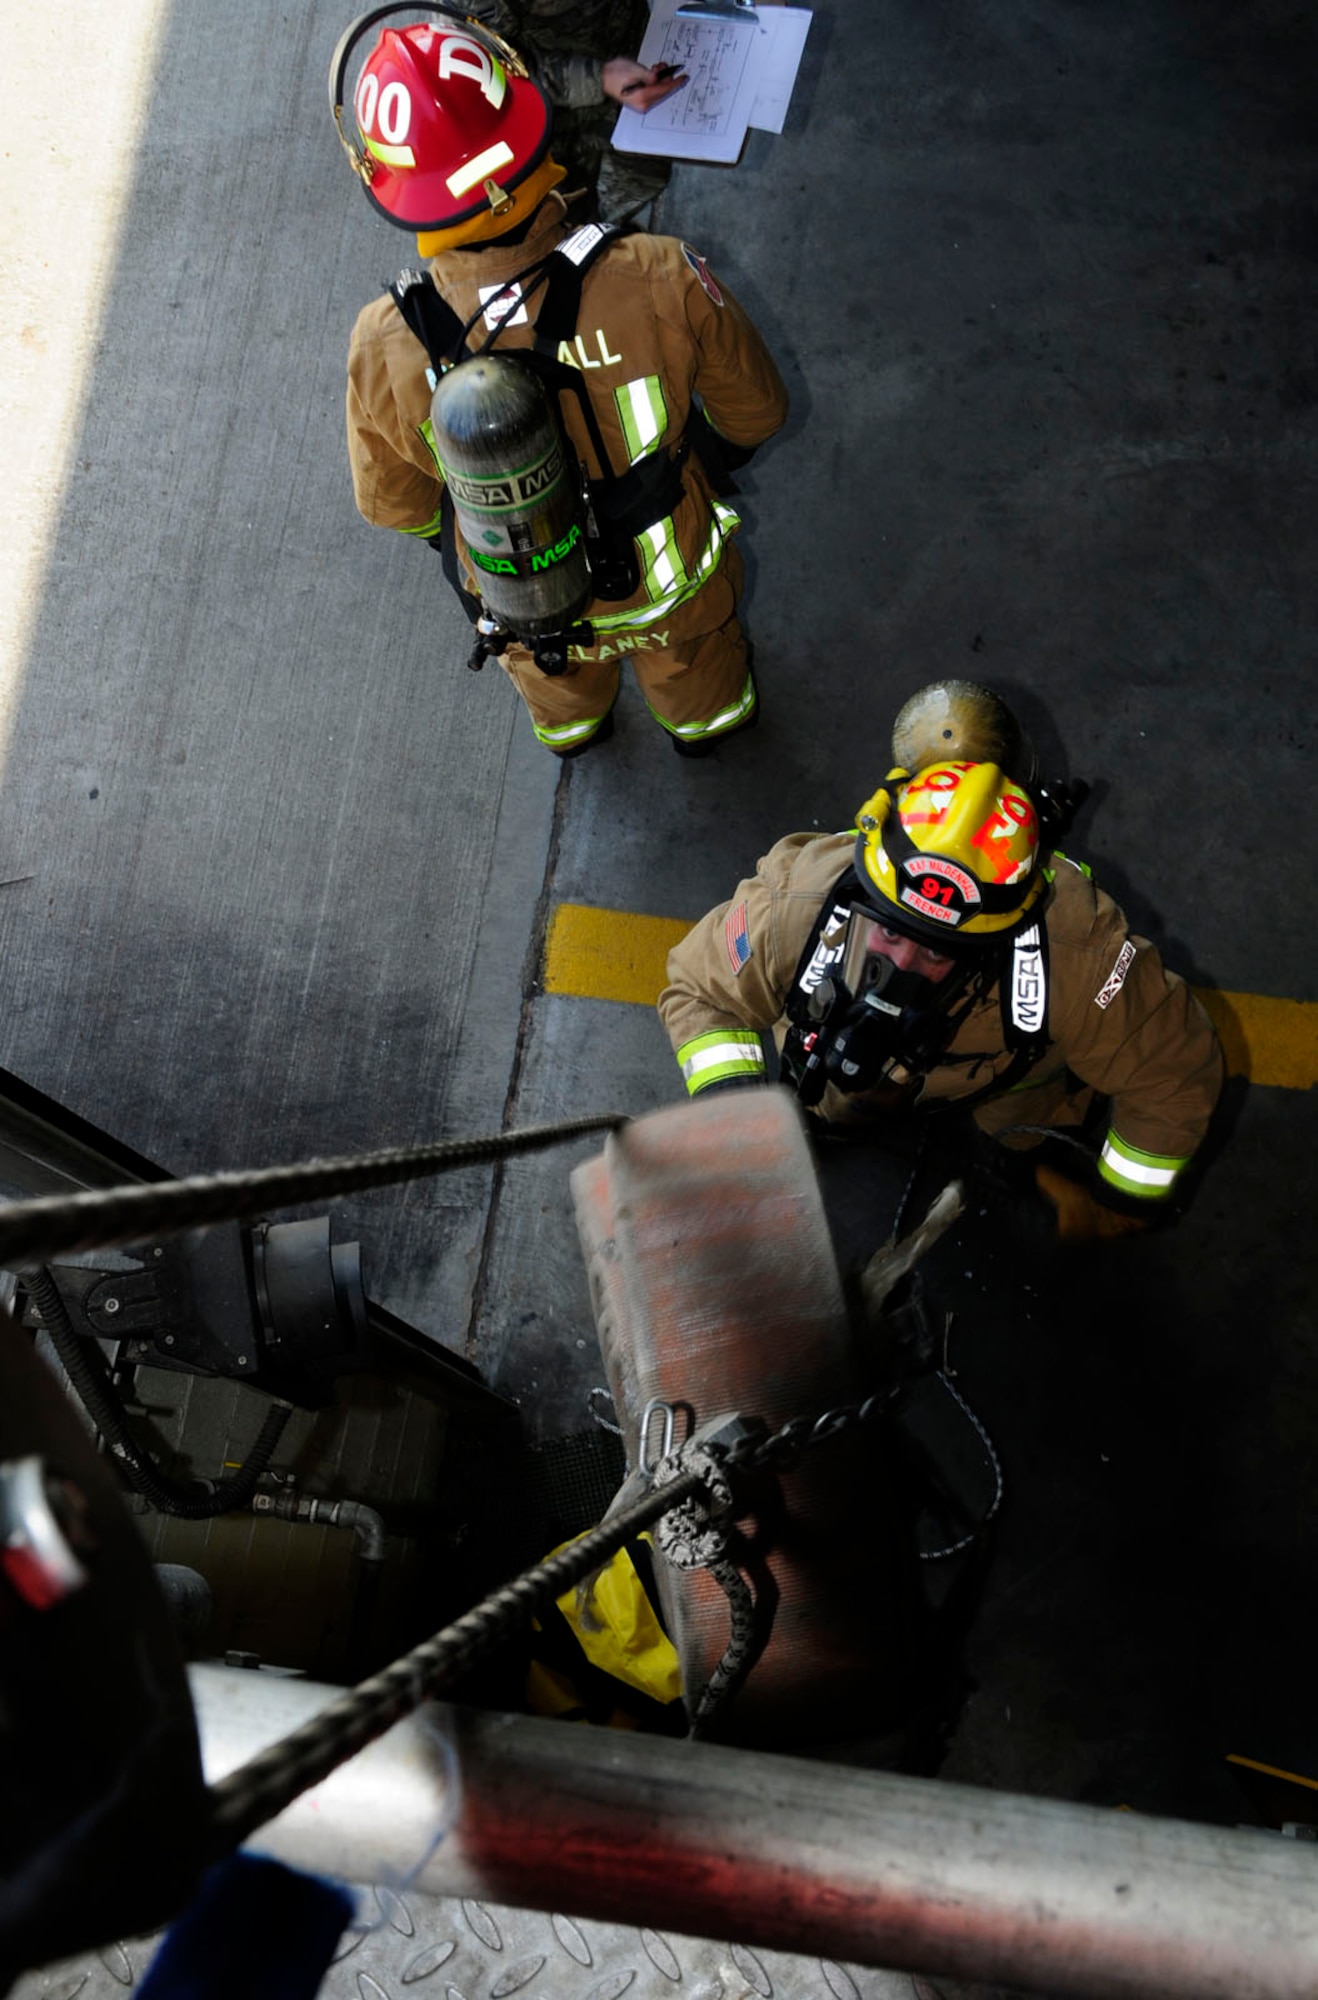 Firefighter Jason French, 100th Civil Engineer Squadron Fire Department from Lakenheath, Suffolk, hoists a 50-pound rolled hose during self-contained breathing apparatus training April 14, 2014, at the fire department on RAF Mildenhall, England. In accordance with National Fire Protection Act Standard 1404, all fire departments must provide annual respiratory protection training for all members. RAF Mildenhall firefighters are in the process of completing the training. In addition to reviewing a written training plan, all 100th CES firefighters are completing thorough "hands-on" training to ensure they know exactly how to use their SCBA safely when an emergency occurs. (U.S. Air Force photo by Karen Abeyasekere/Released)